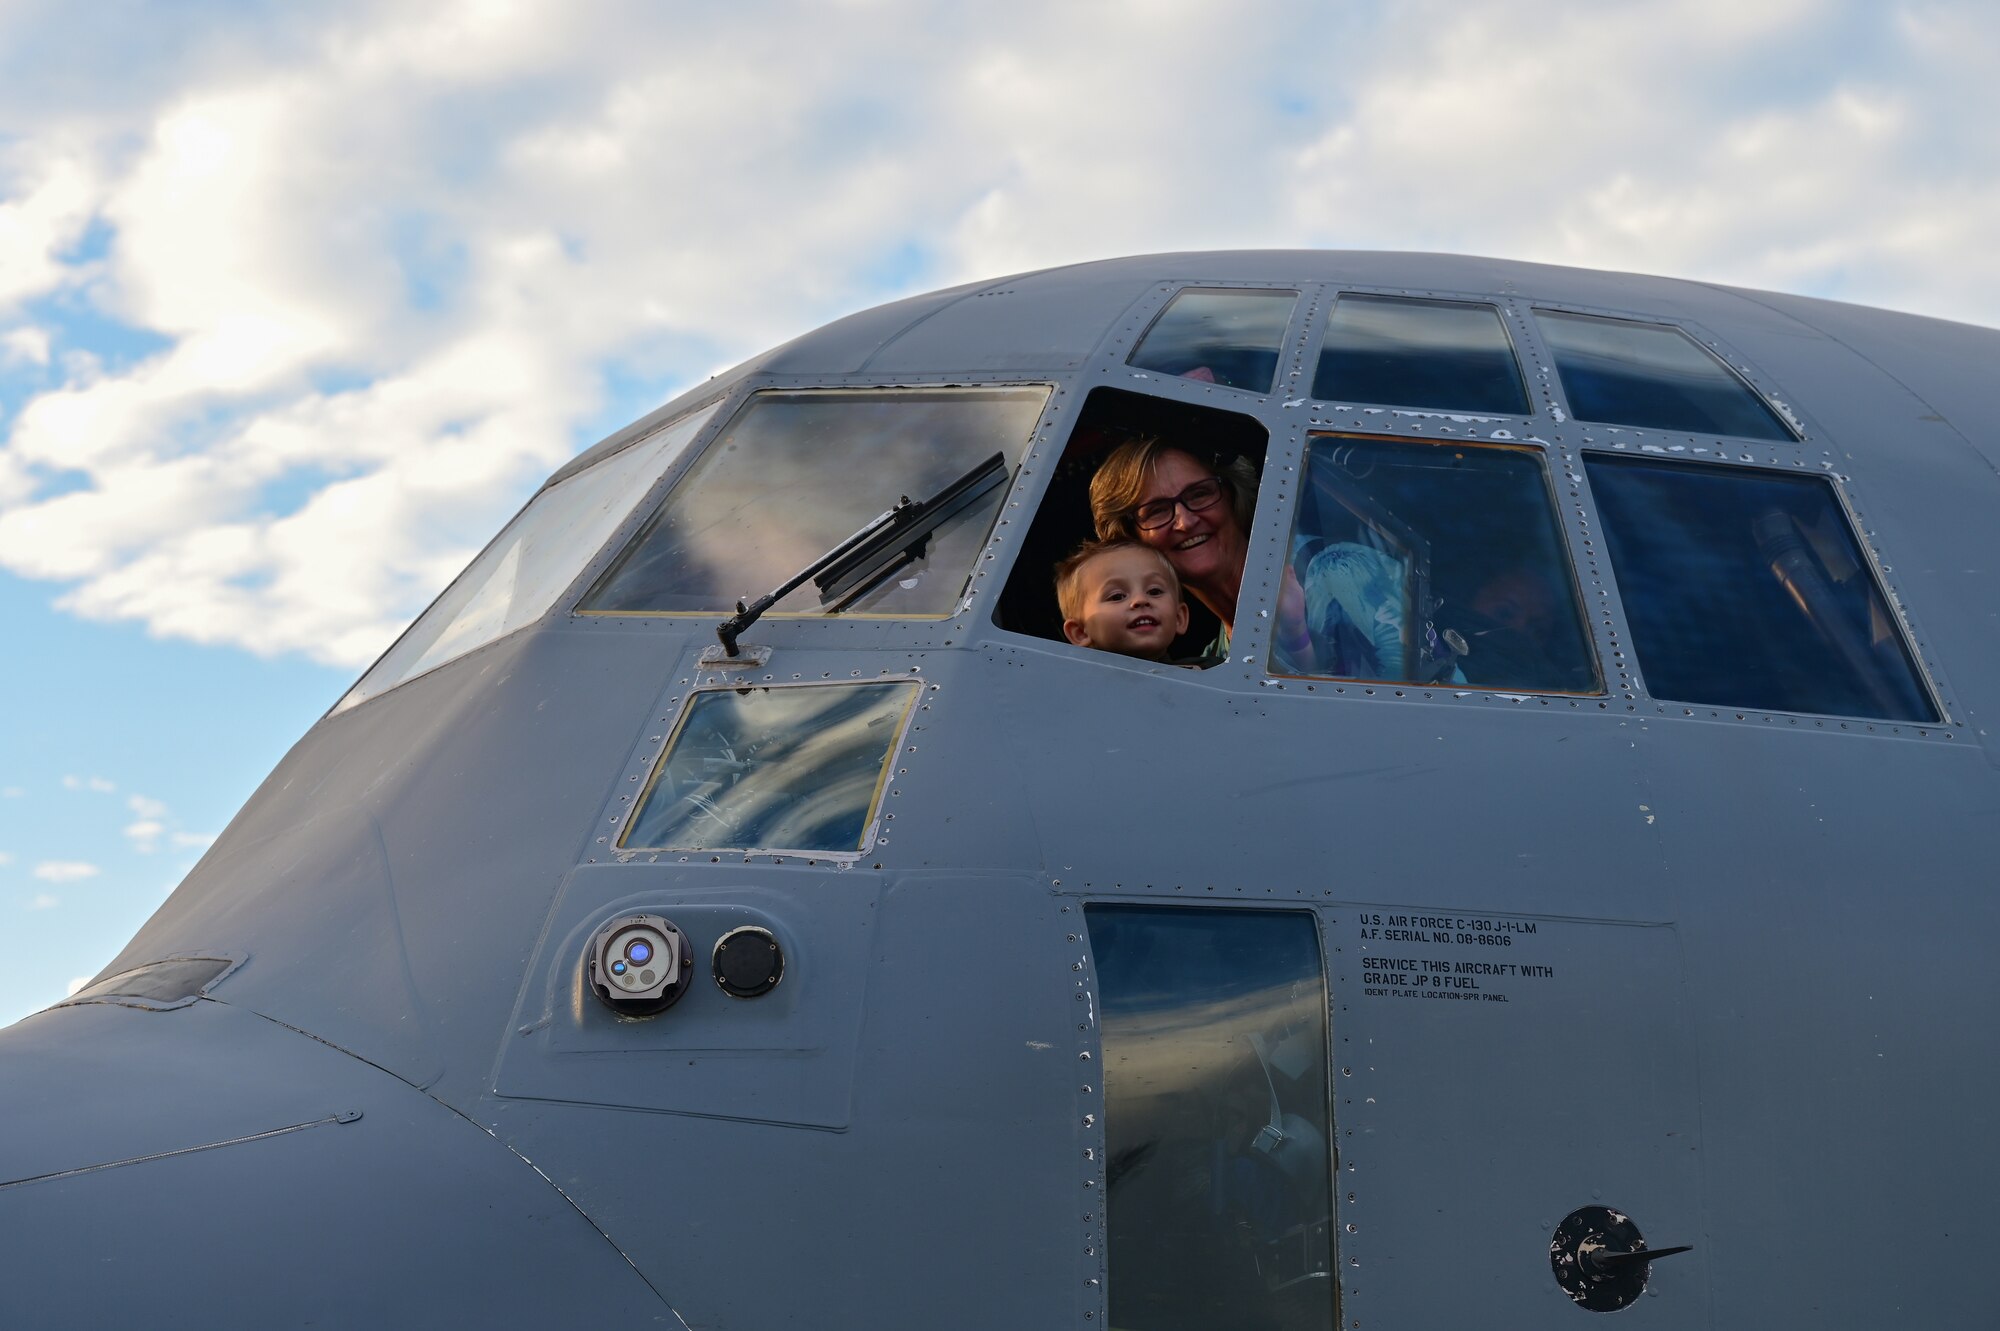 And elderly woman and child look out the window of a C-130